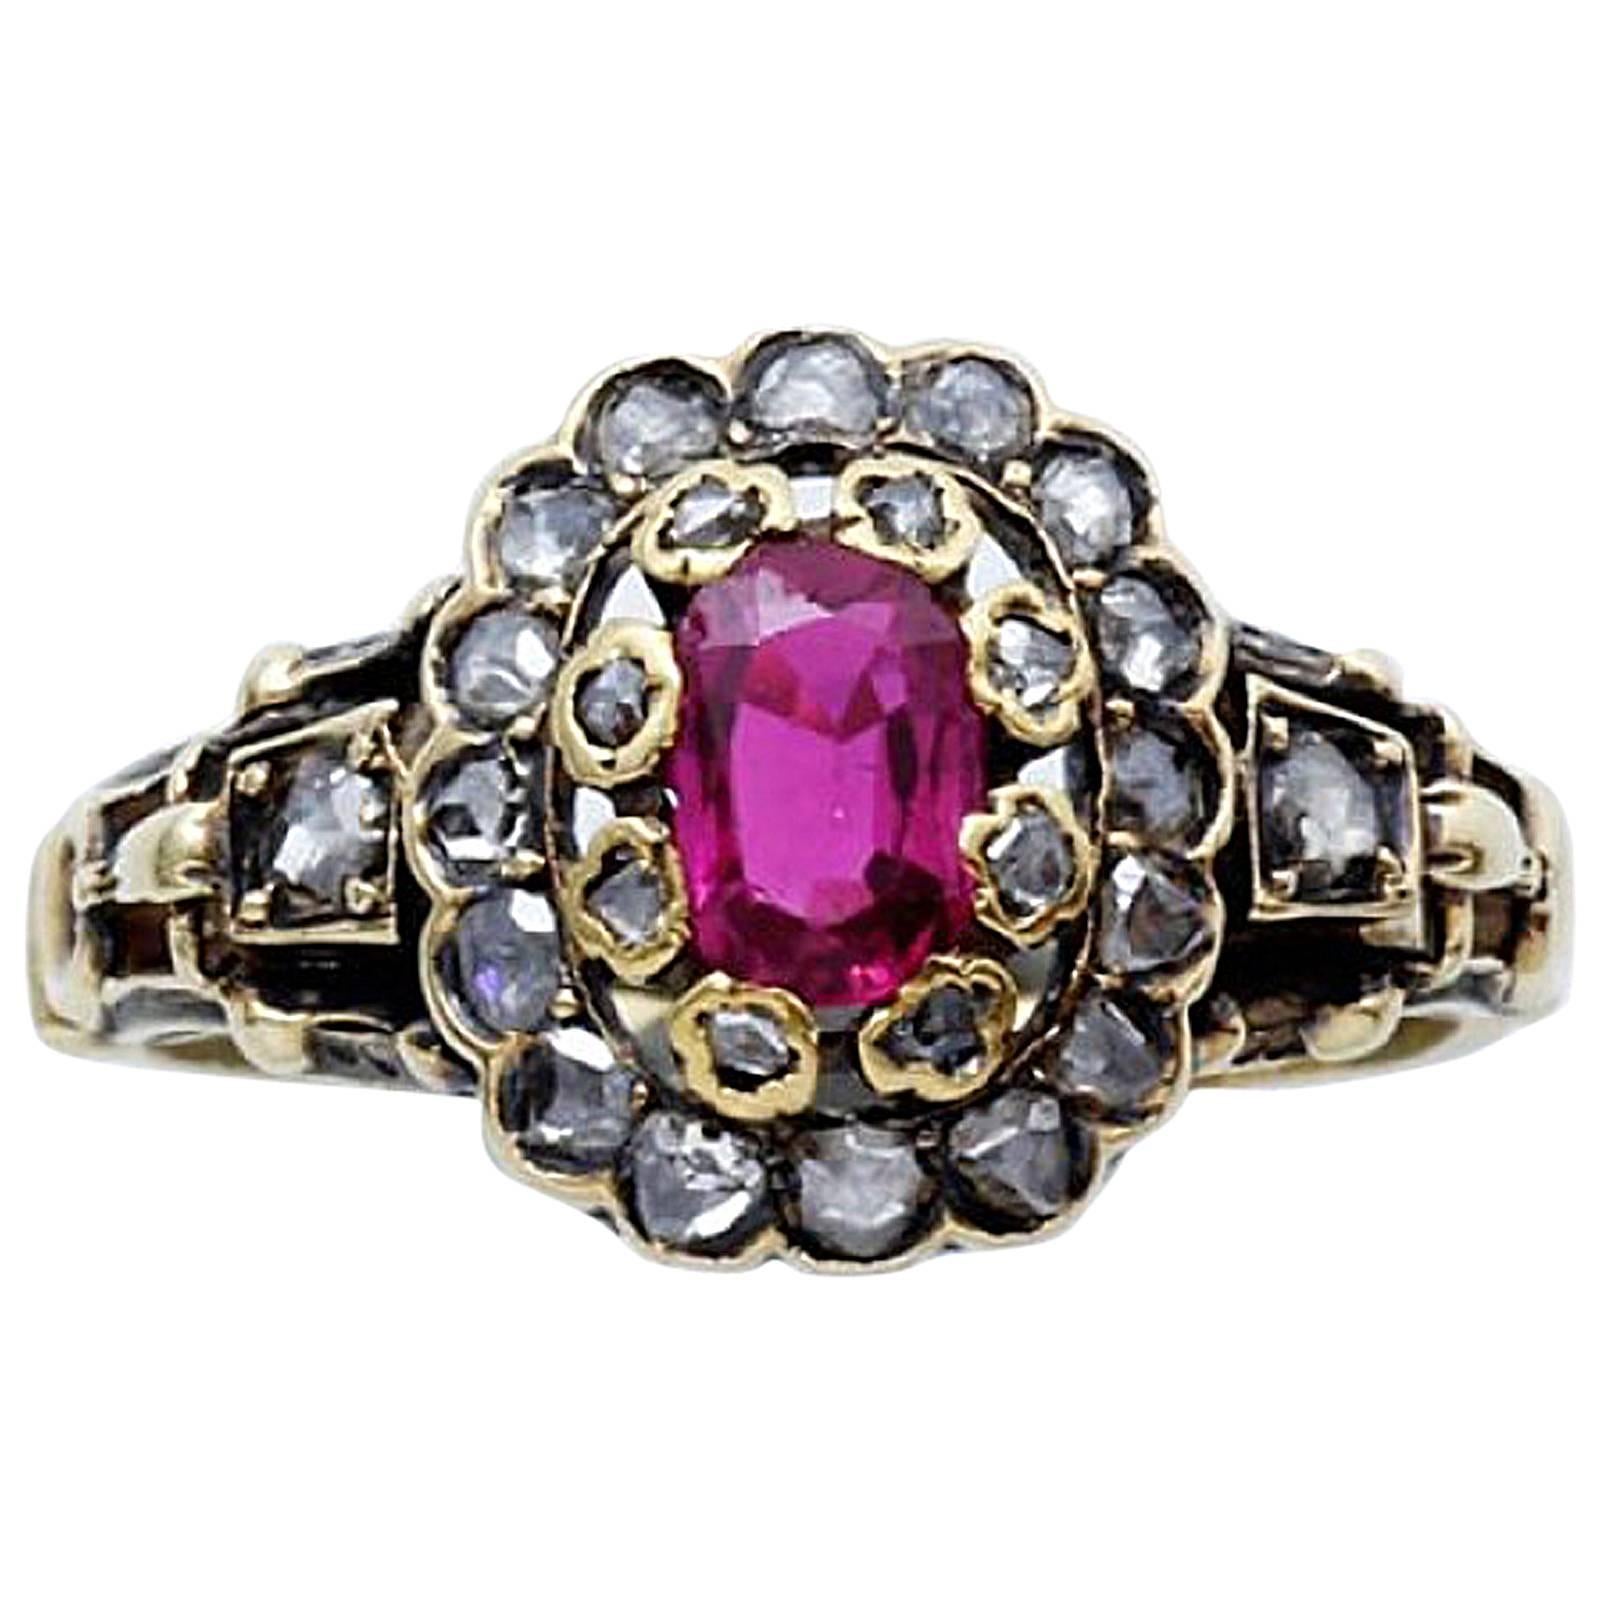 An oval ruby mounted in gold ring surrounded by rose cut diamond
14k Yellow gold 585
Mid-19th Century.

Ring size: 3 3/4.
